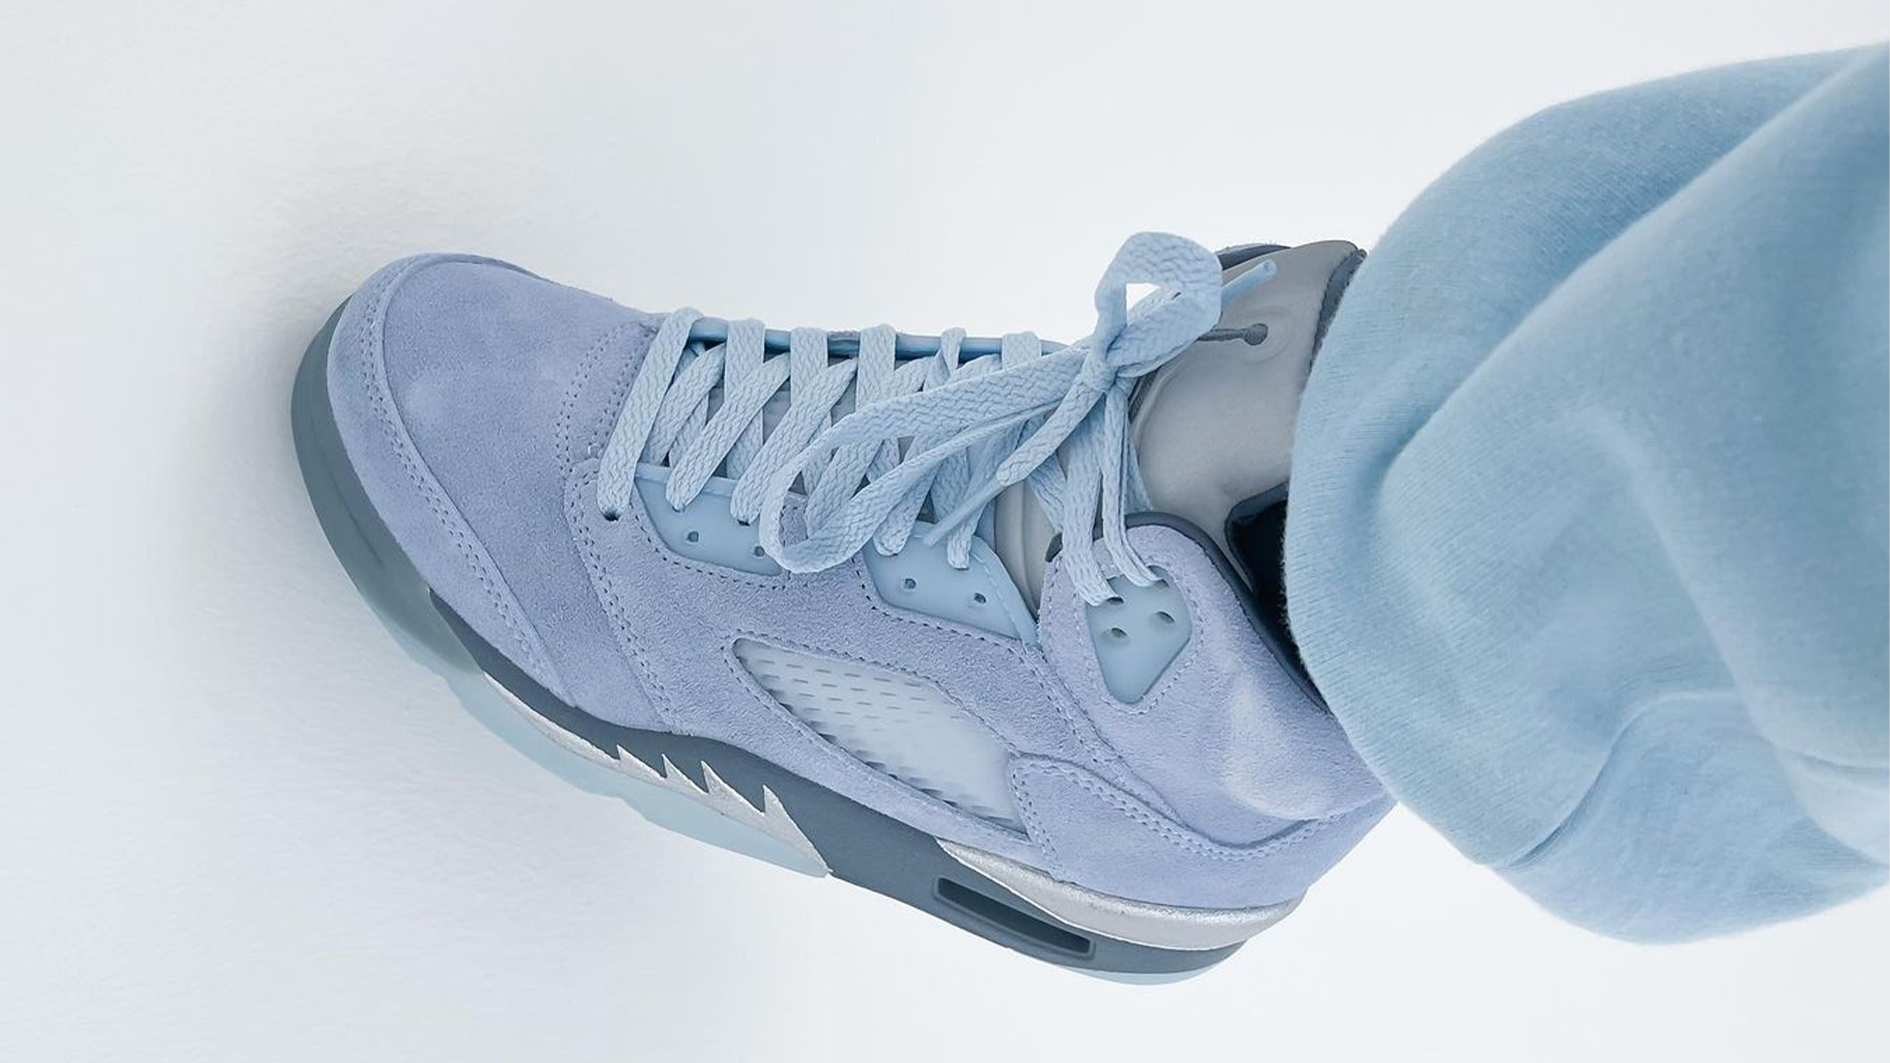 Signal Significance Striped Air Jordan 5 Sizing: How Do They Fit? | The Sole Supplier